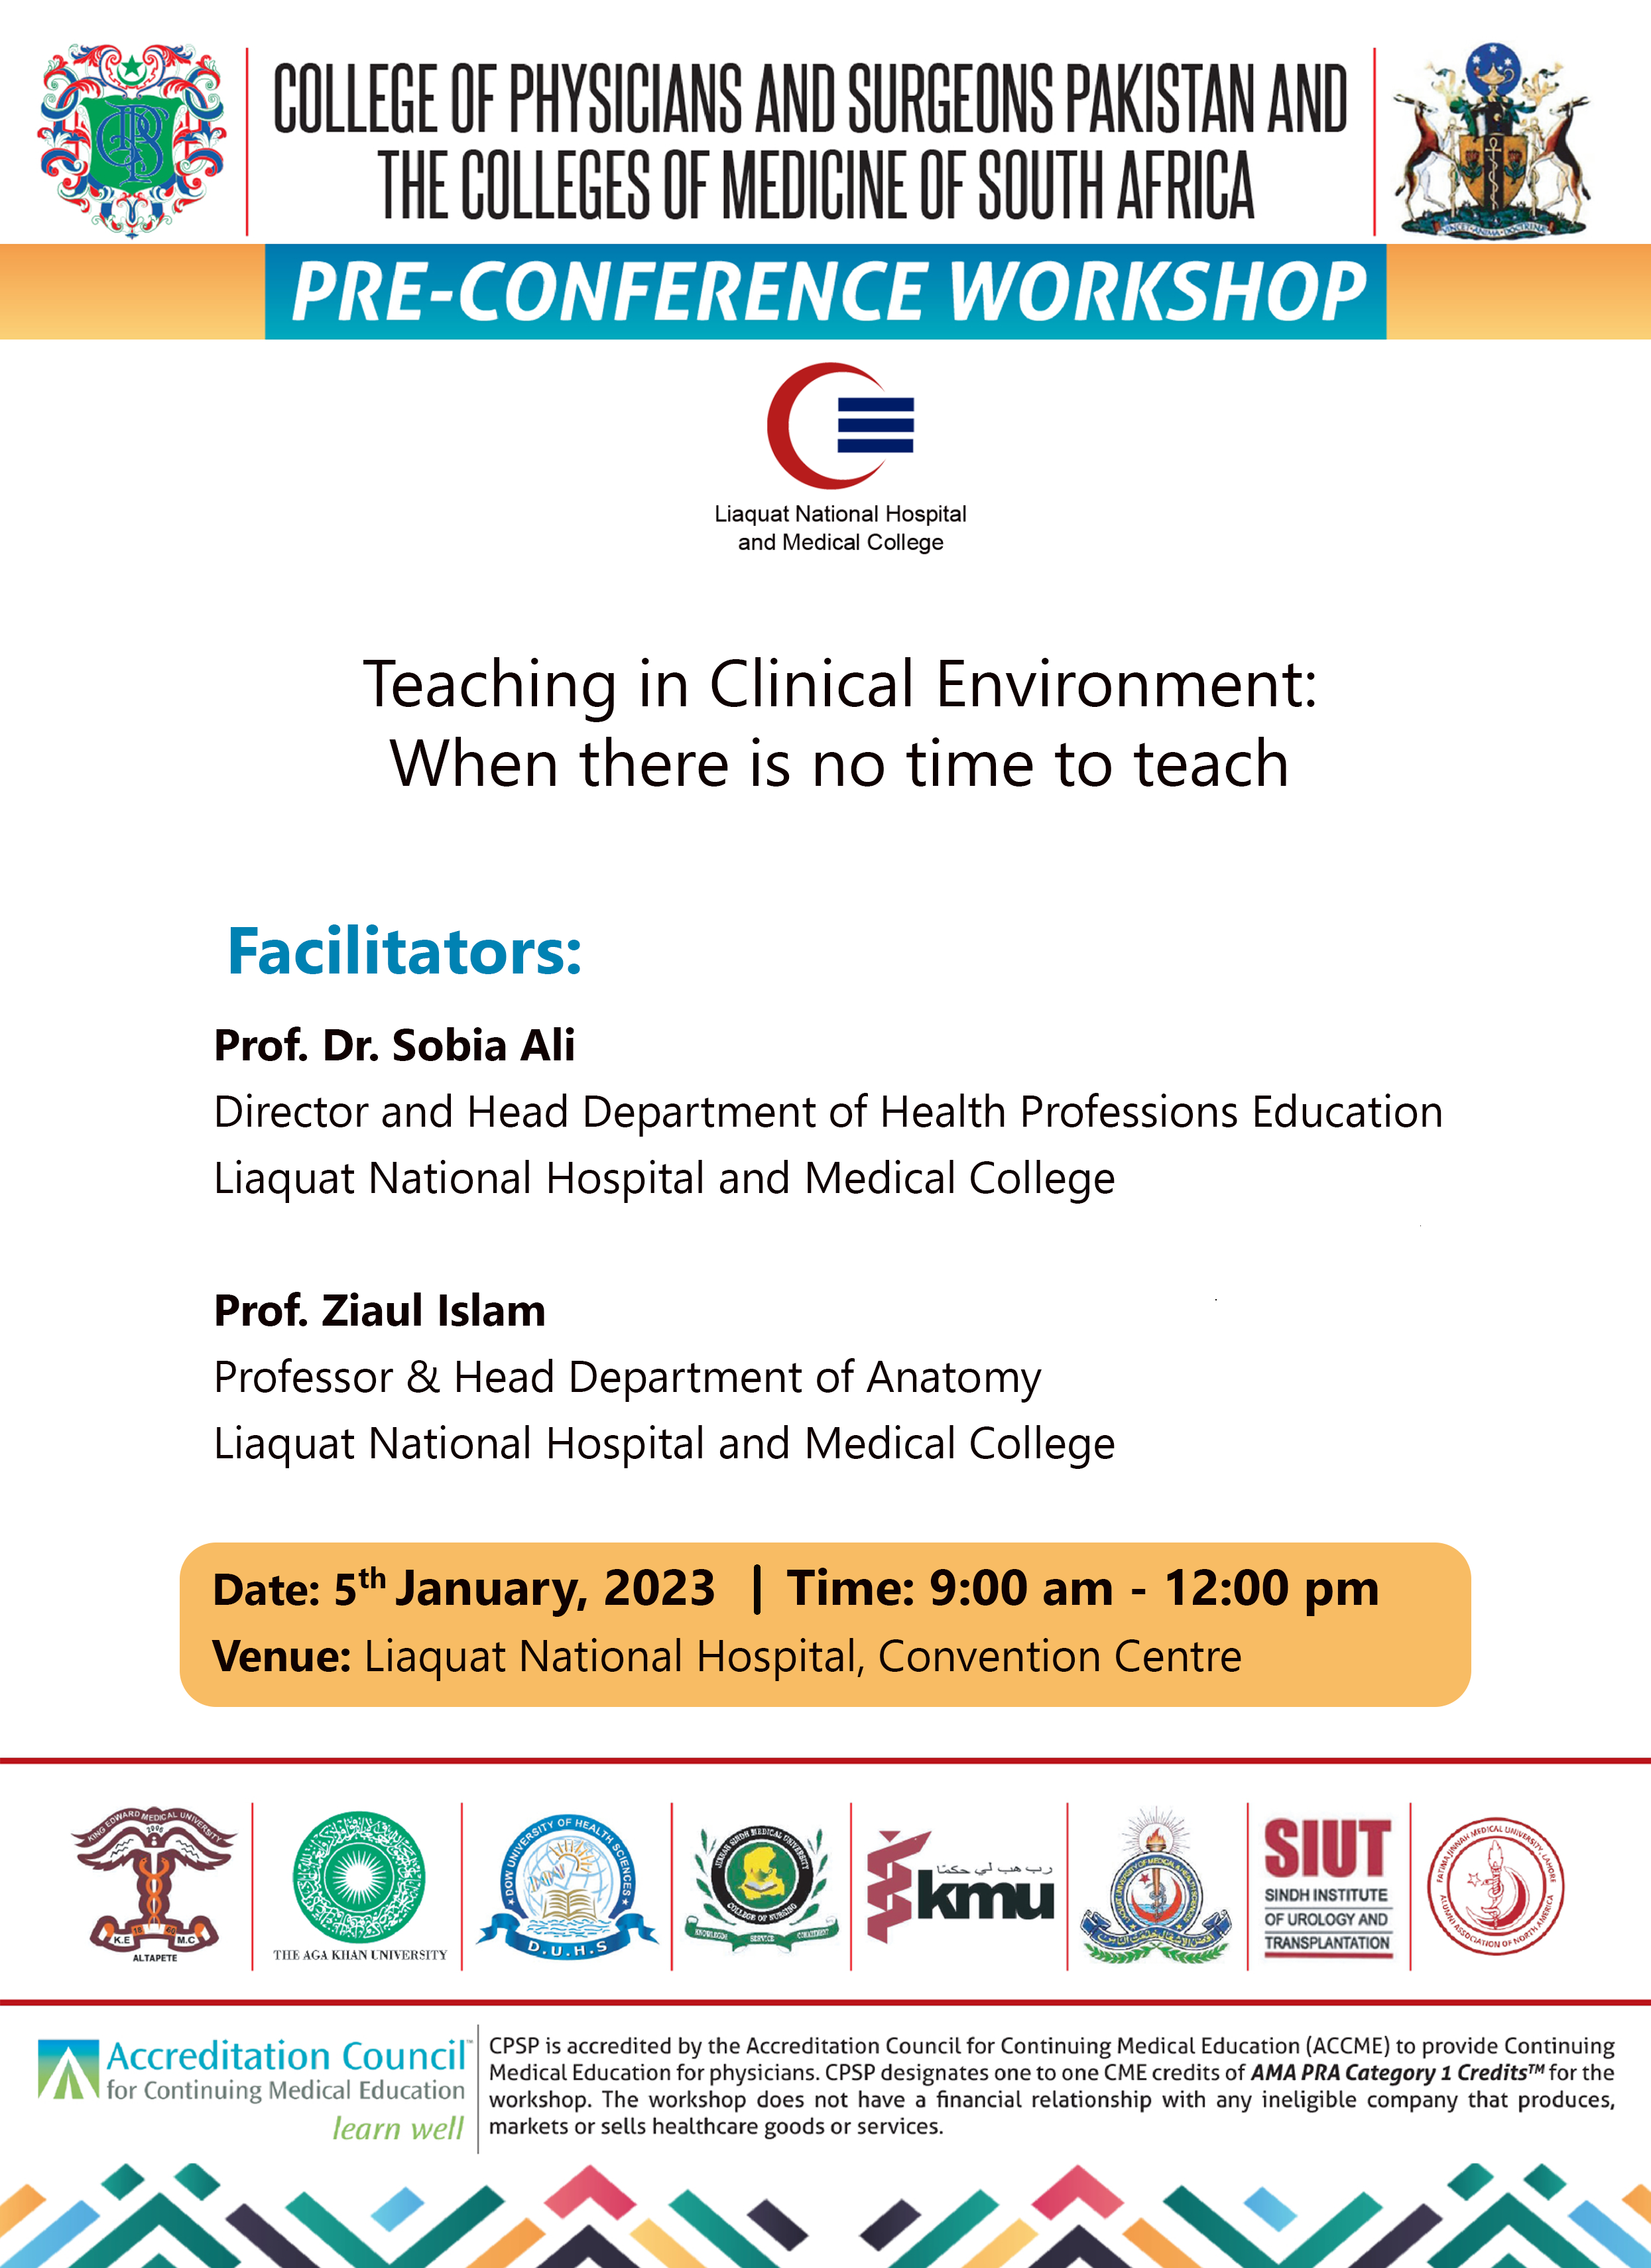 Pre-conference Workshop- Teaching in Clinical Environment: When there is no Time to Teach